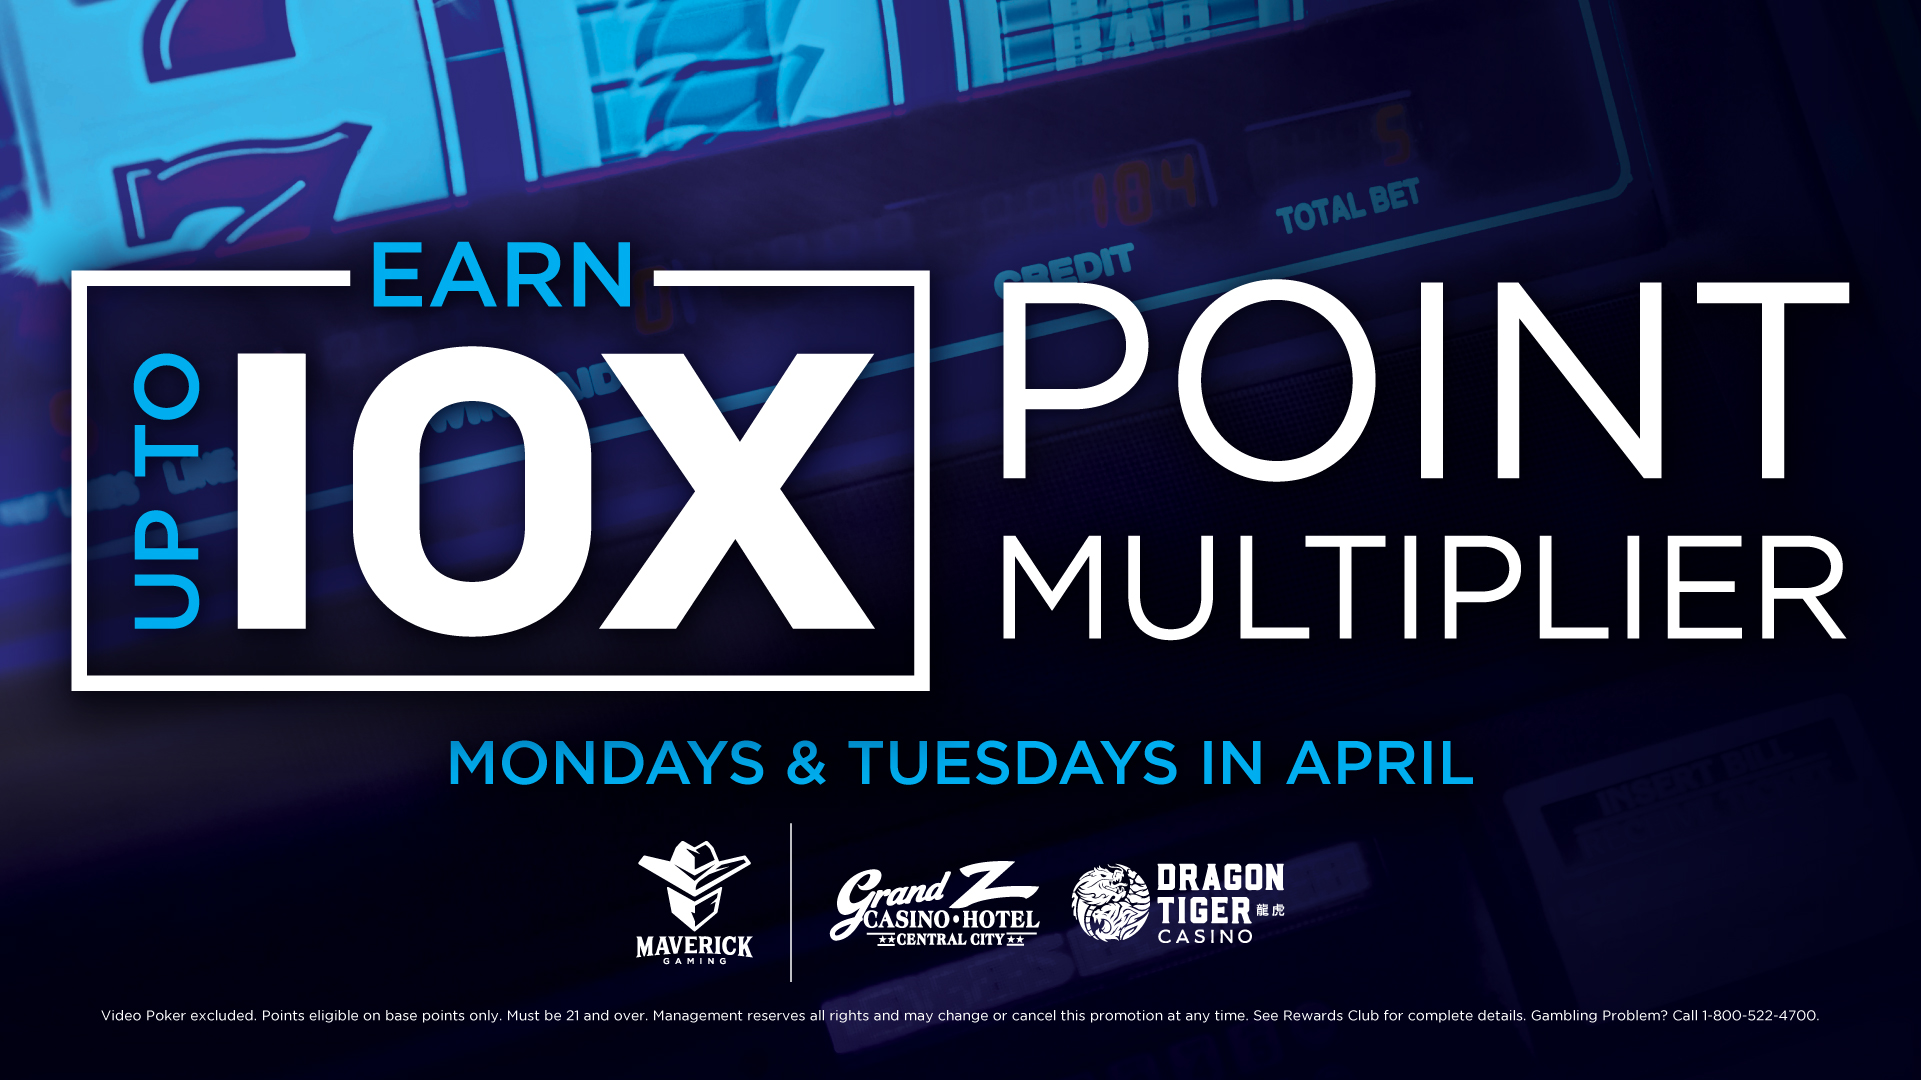 10X Multiplier Mondays and Tuesdays in April